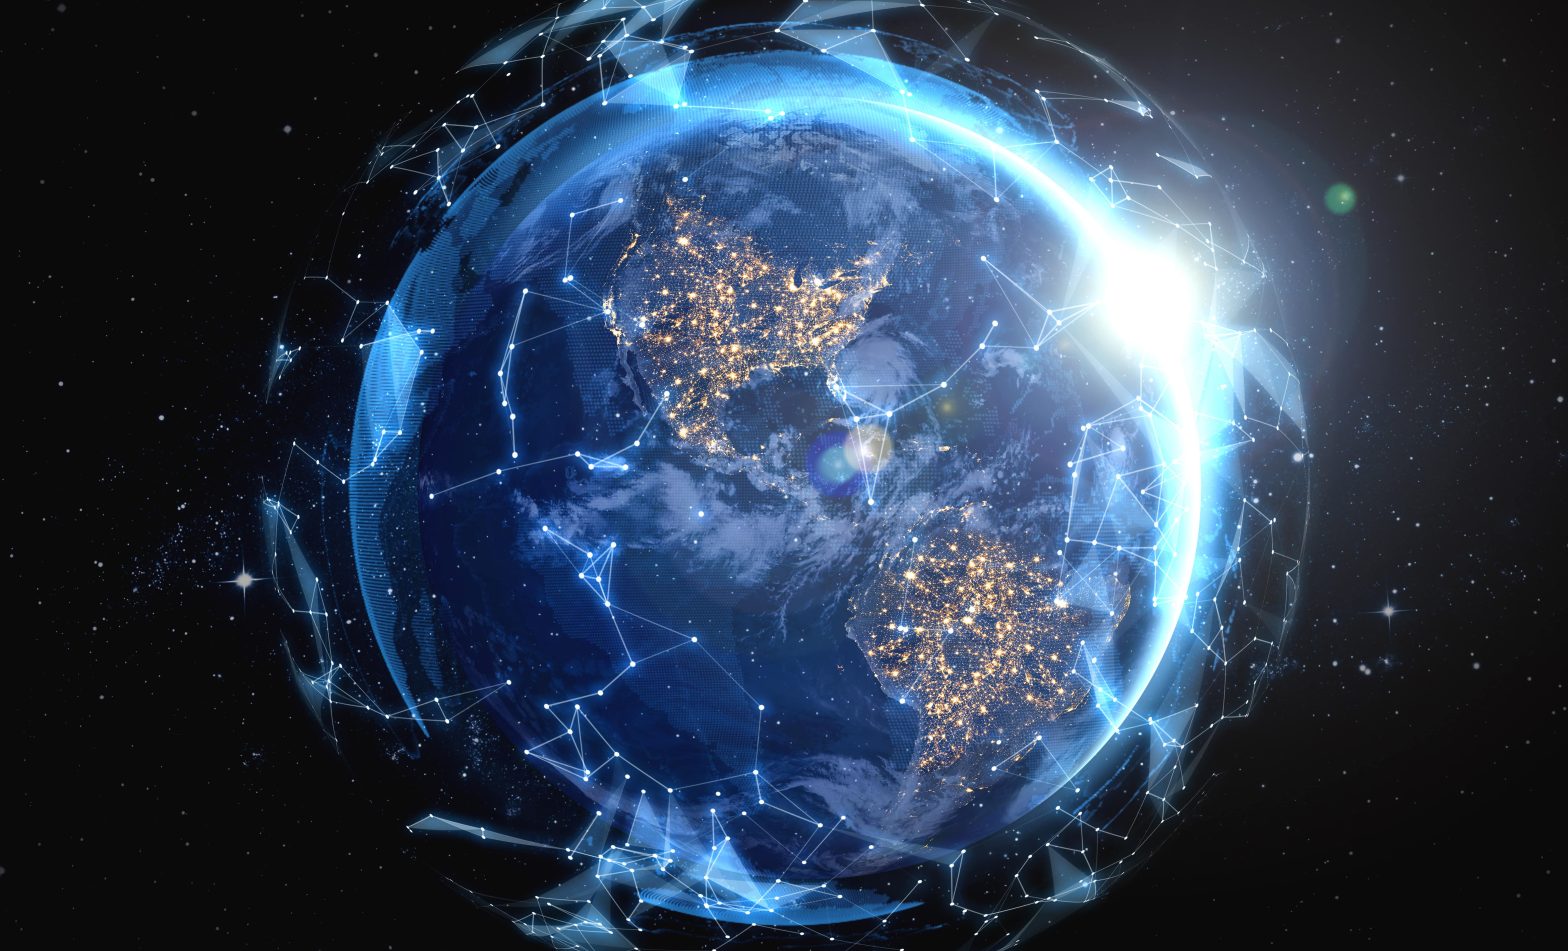 Space-Based Telecommunications and the Future of Internet Connectivity